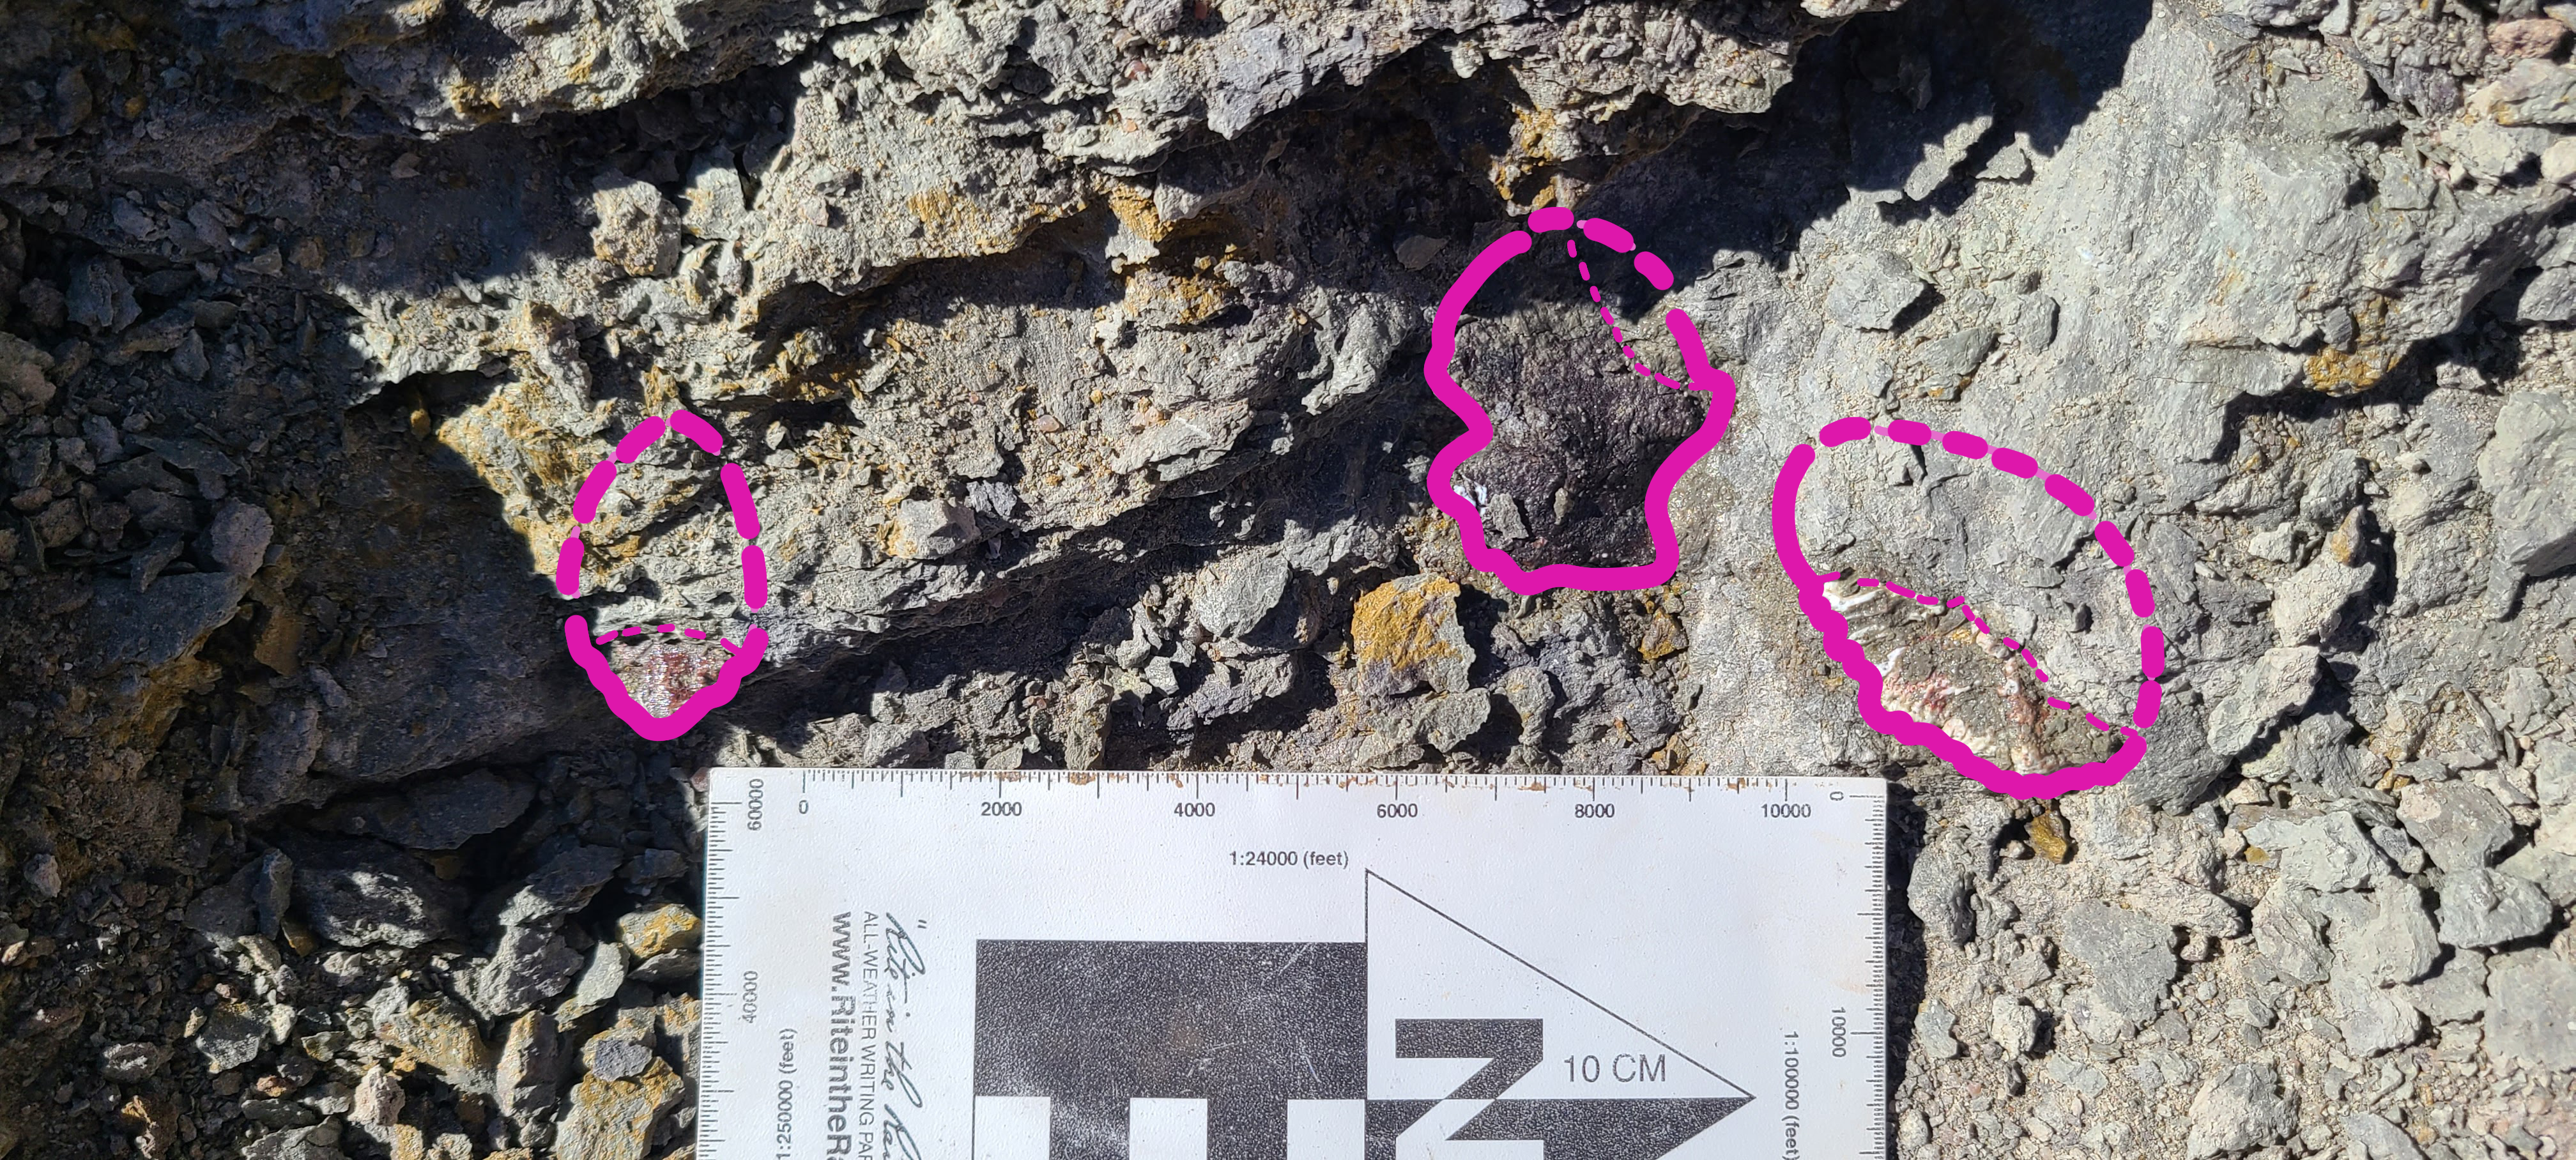 Phytosaur skin armor bones, called osteoderms, as found by the team. Outlined for ease of identification.